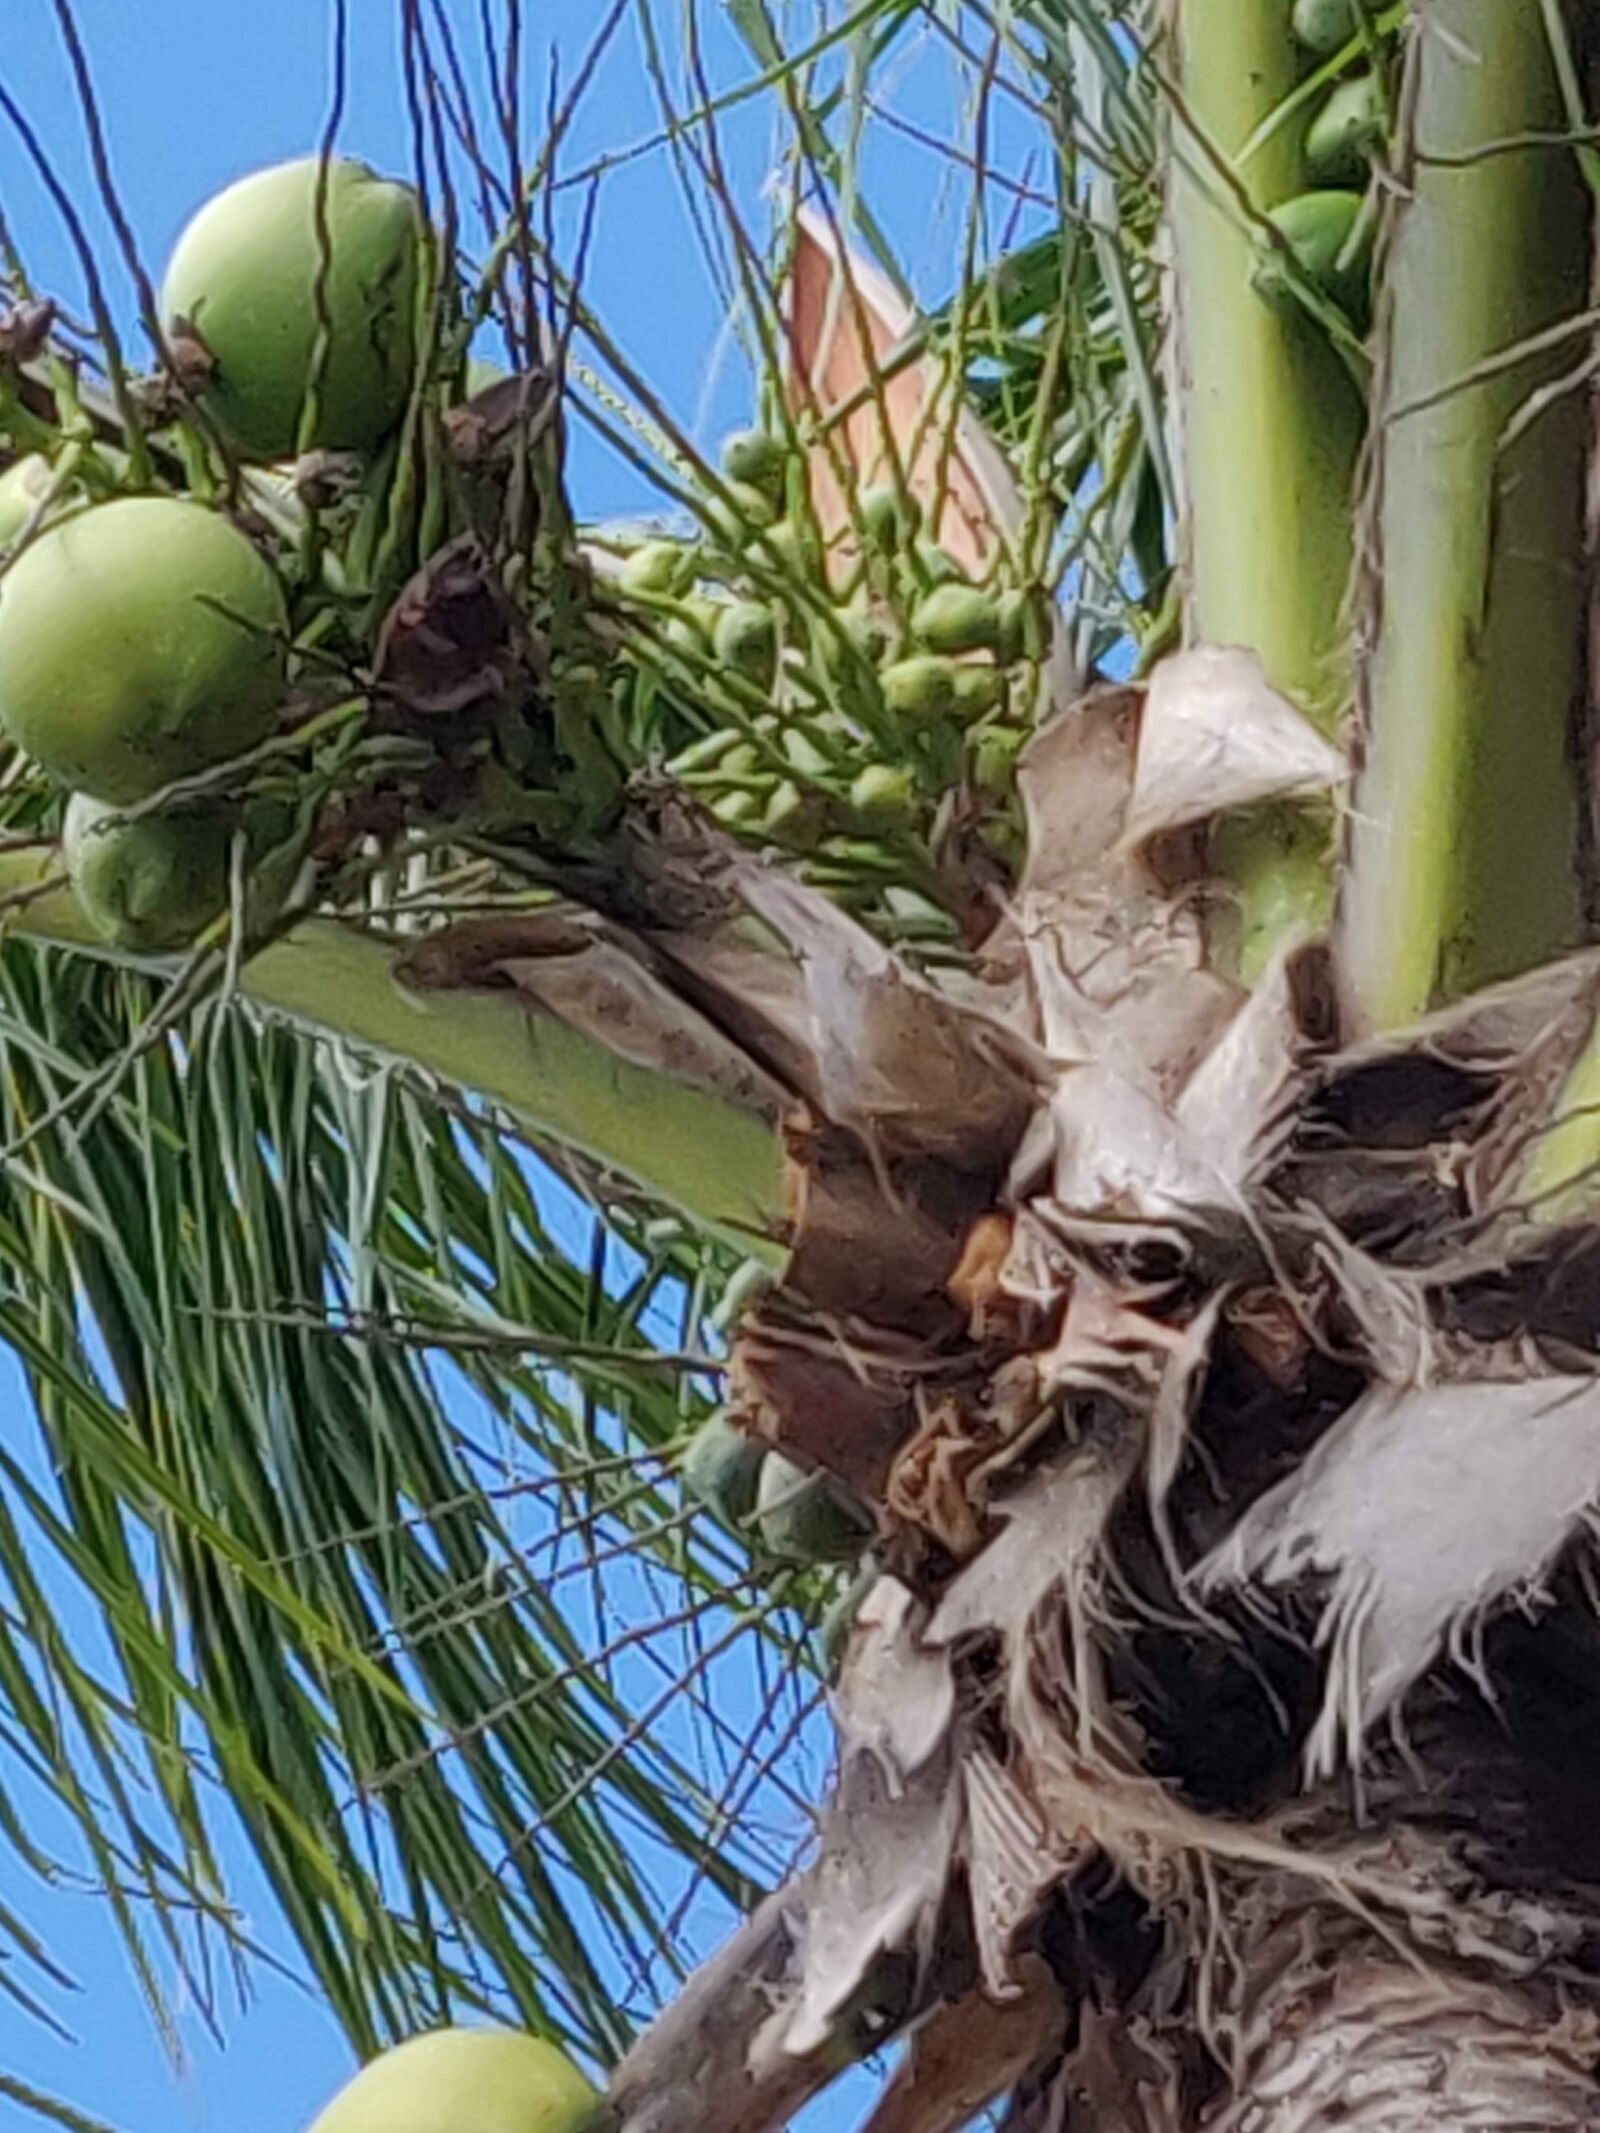 OnePlus A6000 sample photo. Coconut, plant, tropical photography